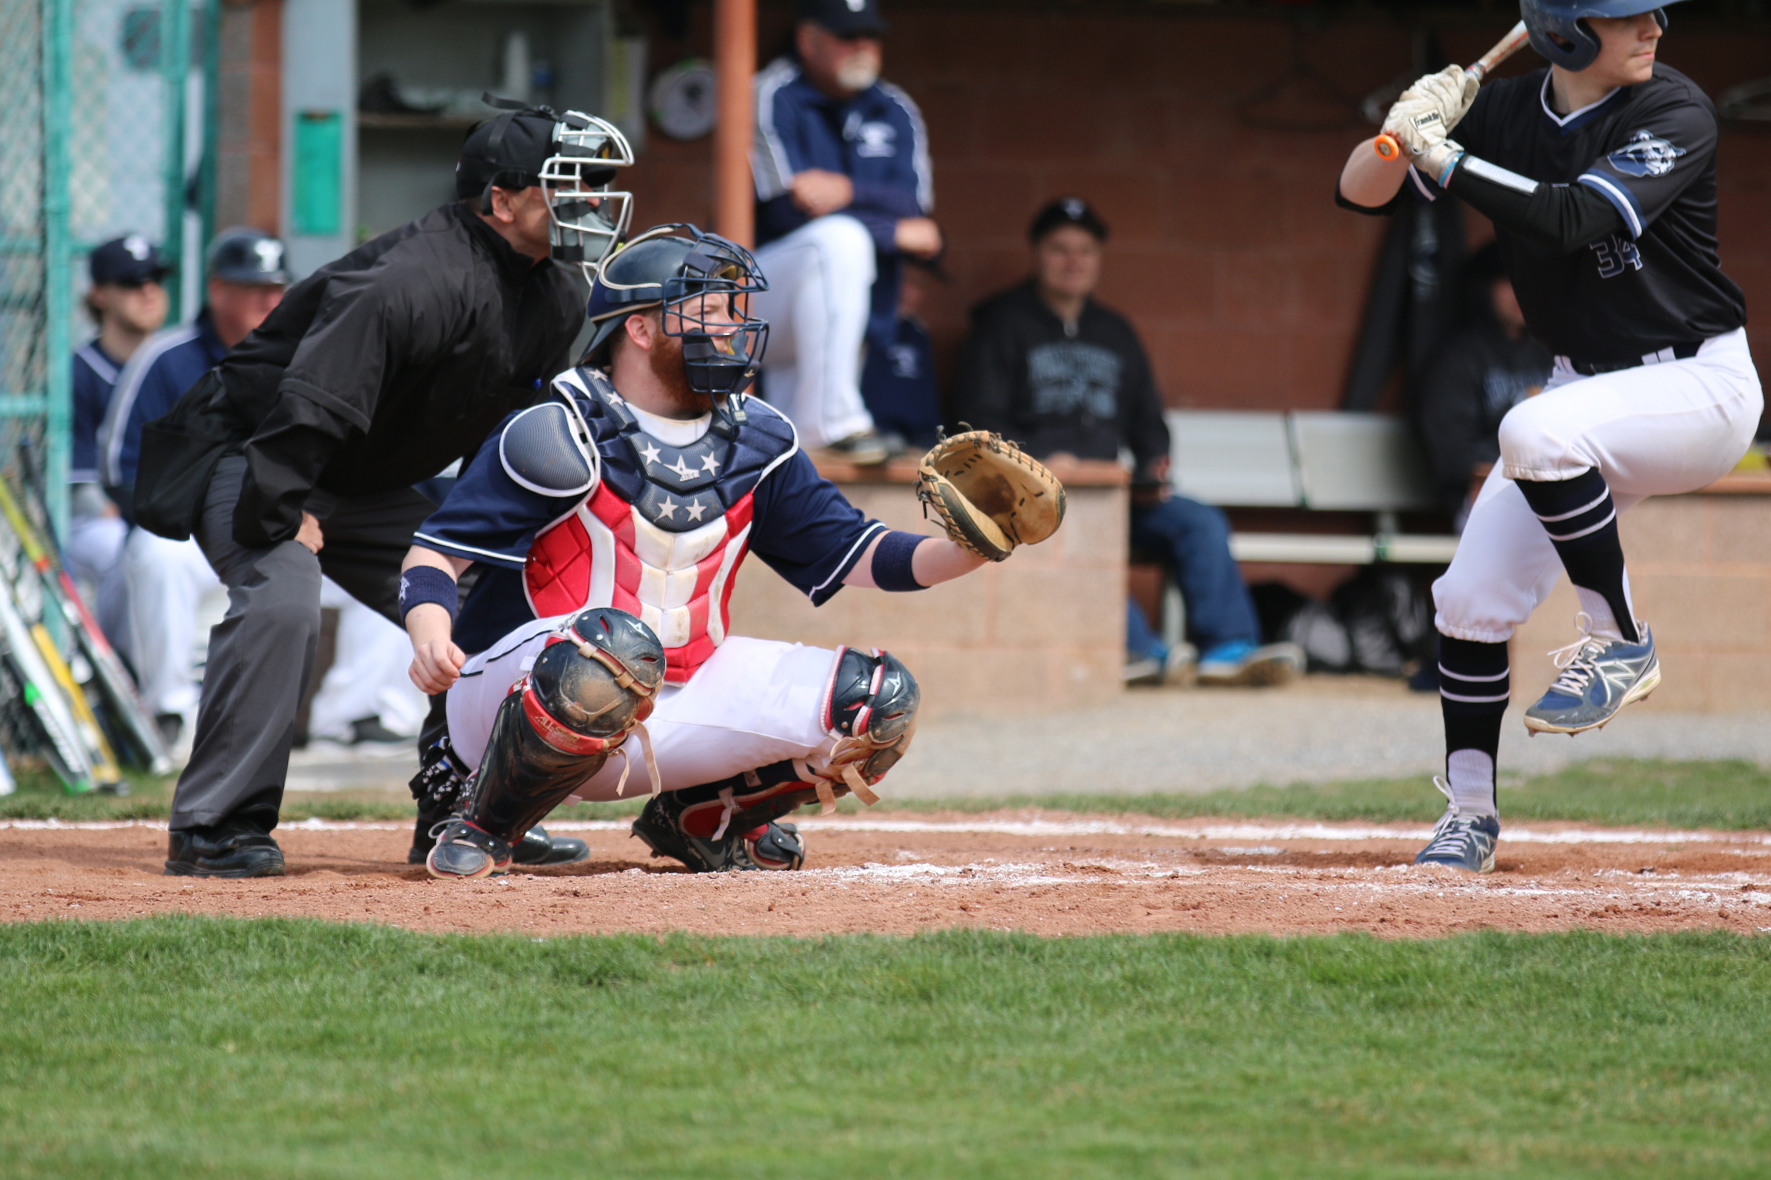 Catcher Brady Lefever prepares to receive the ball during Friday’s home game.

Photo credit: Lawrence J. Spady